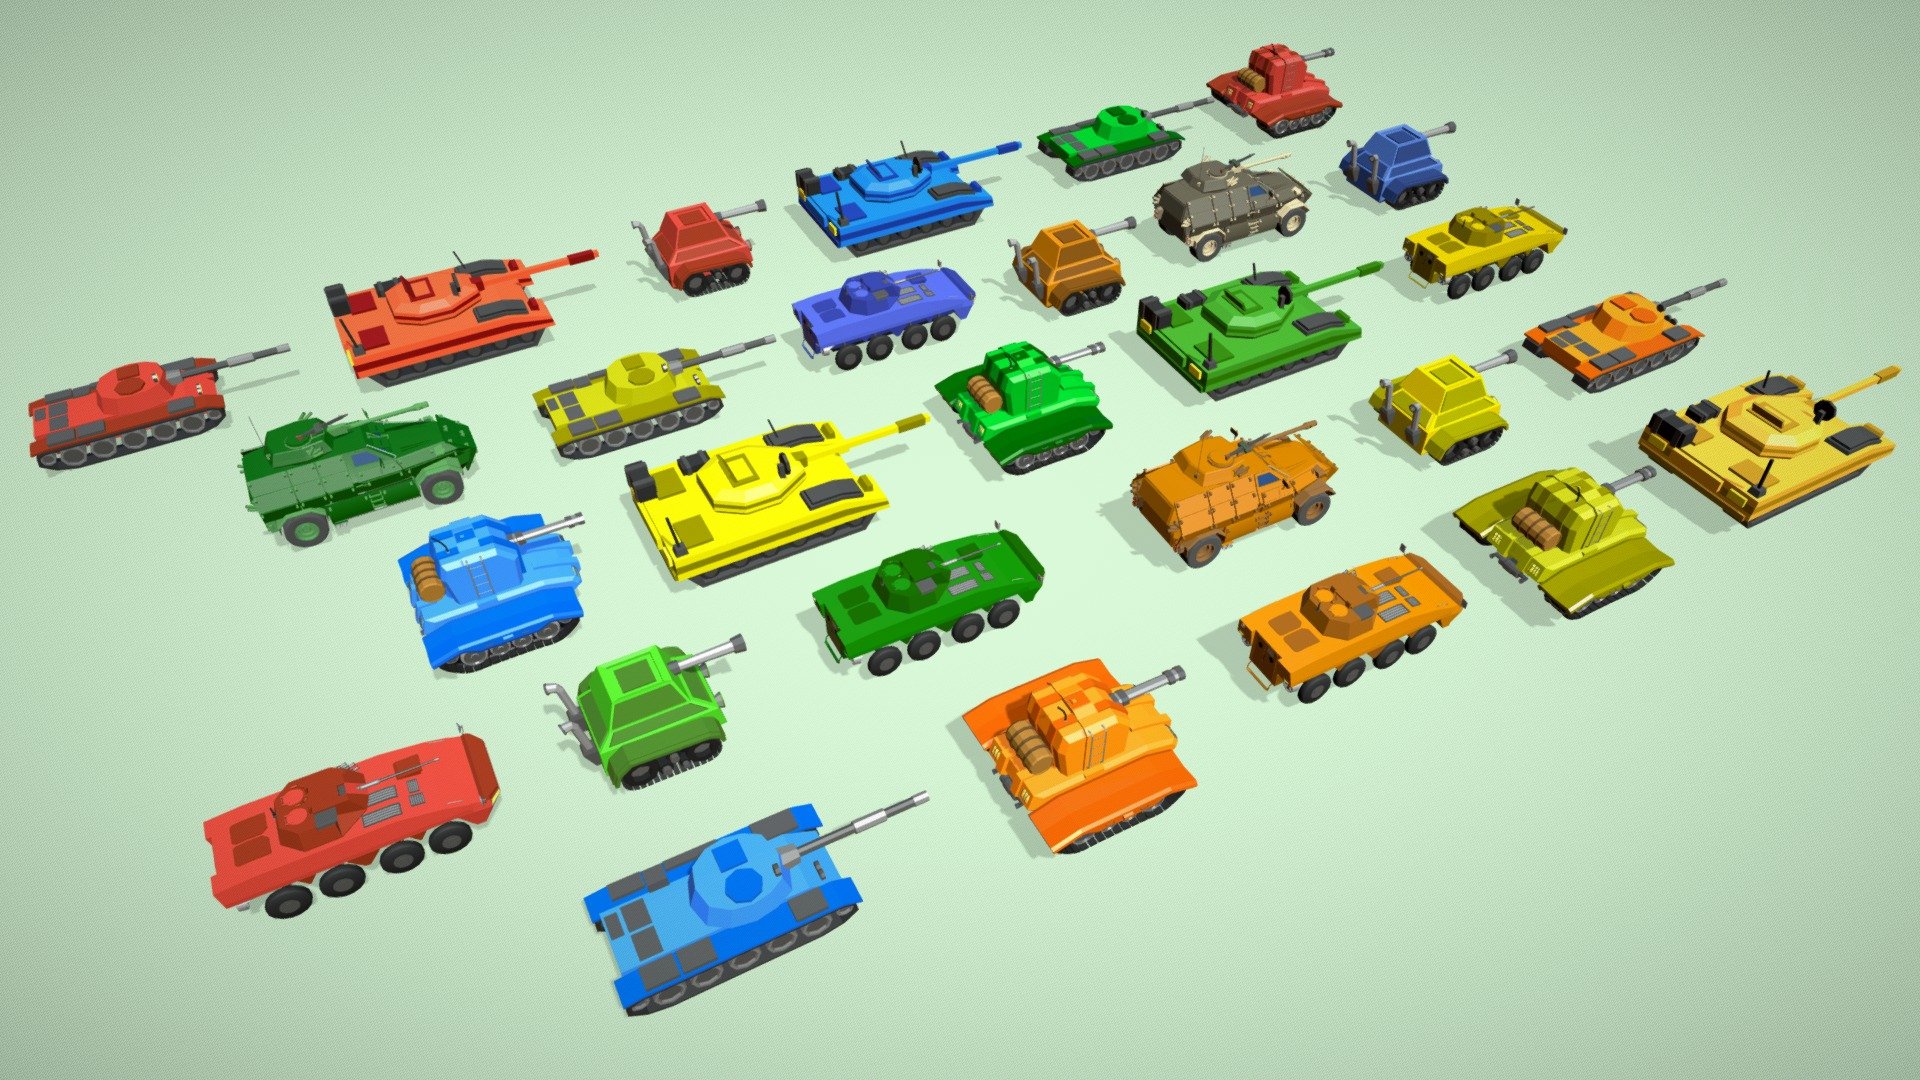 Created 25 very nice Bicycles in a single pack.
All the models are originally prepared in Blender.
Package includes the following file formats: Blend, Fbx, Obj, Glb

Enjoy this Army Tank pack. If you like it then add comments below 3d model